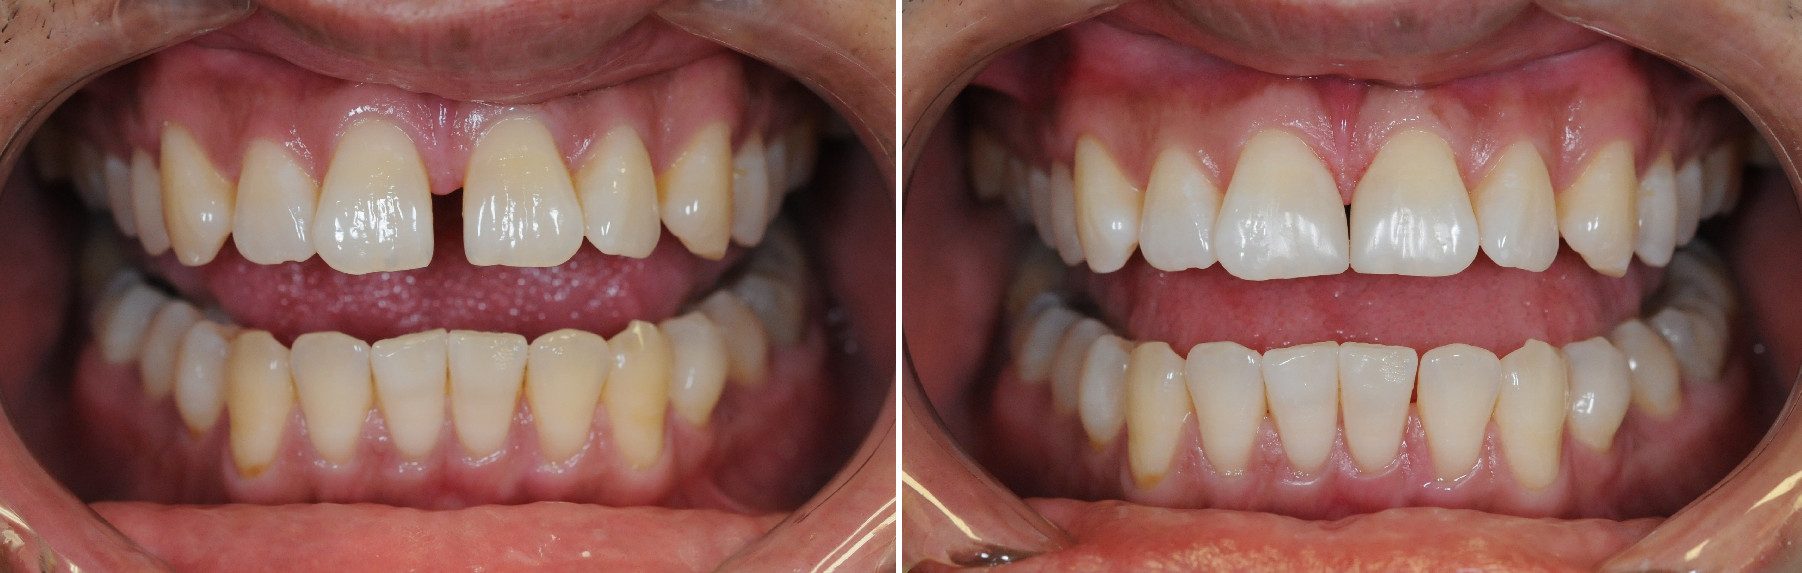 Bonding Case 4 Before & After